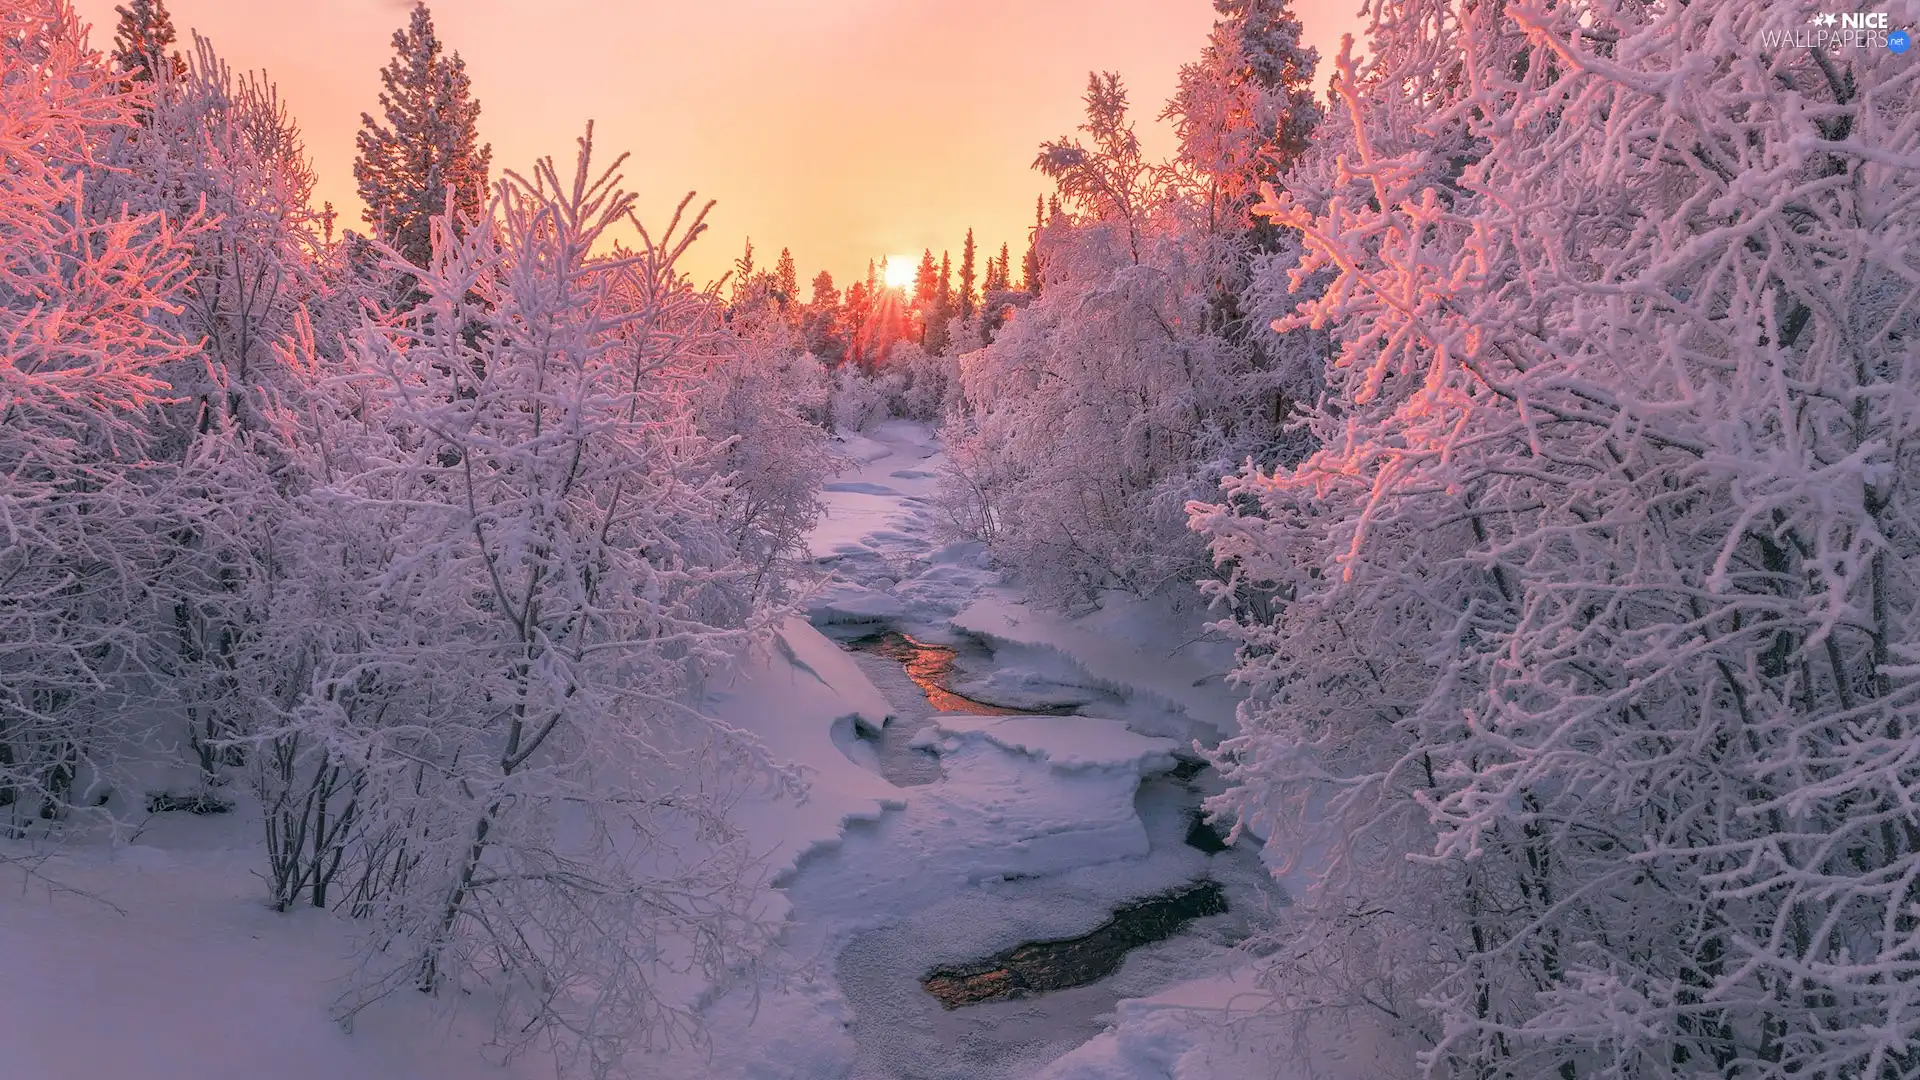 Sunrise, winter, viewes, Snowy, trees, River